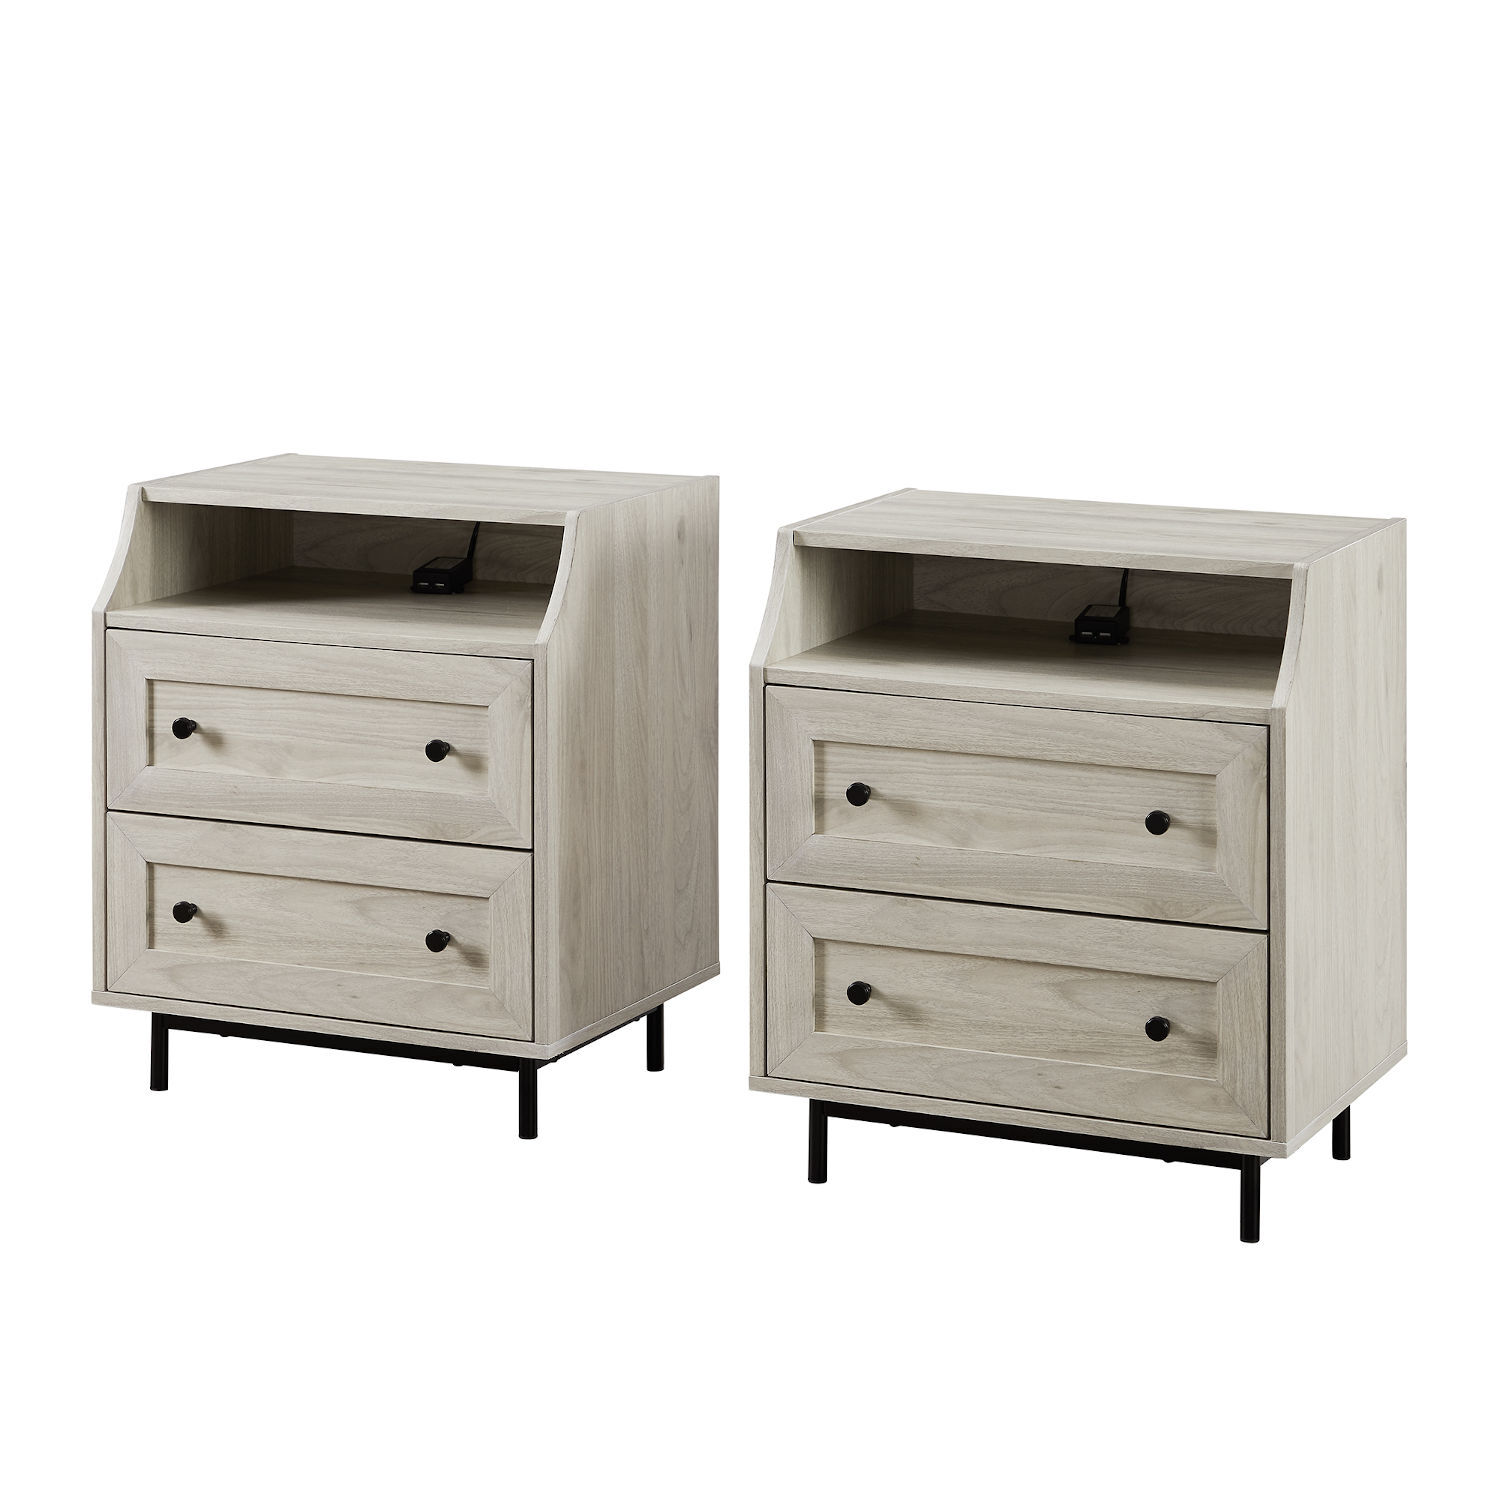 Birch Curved Open Top Two Drawer Nightstand with USB